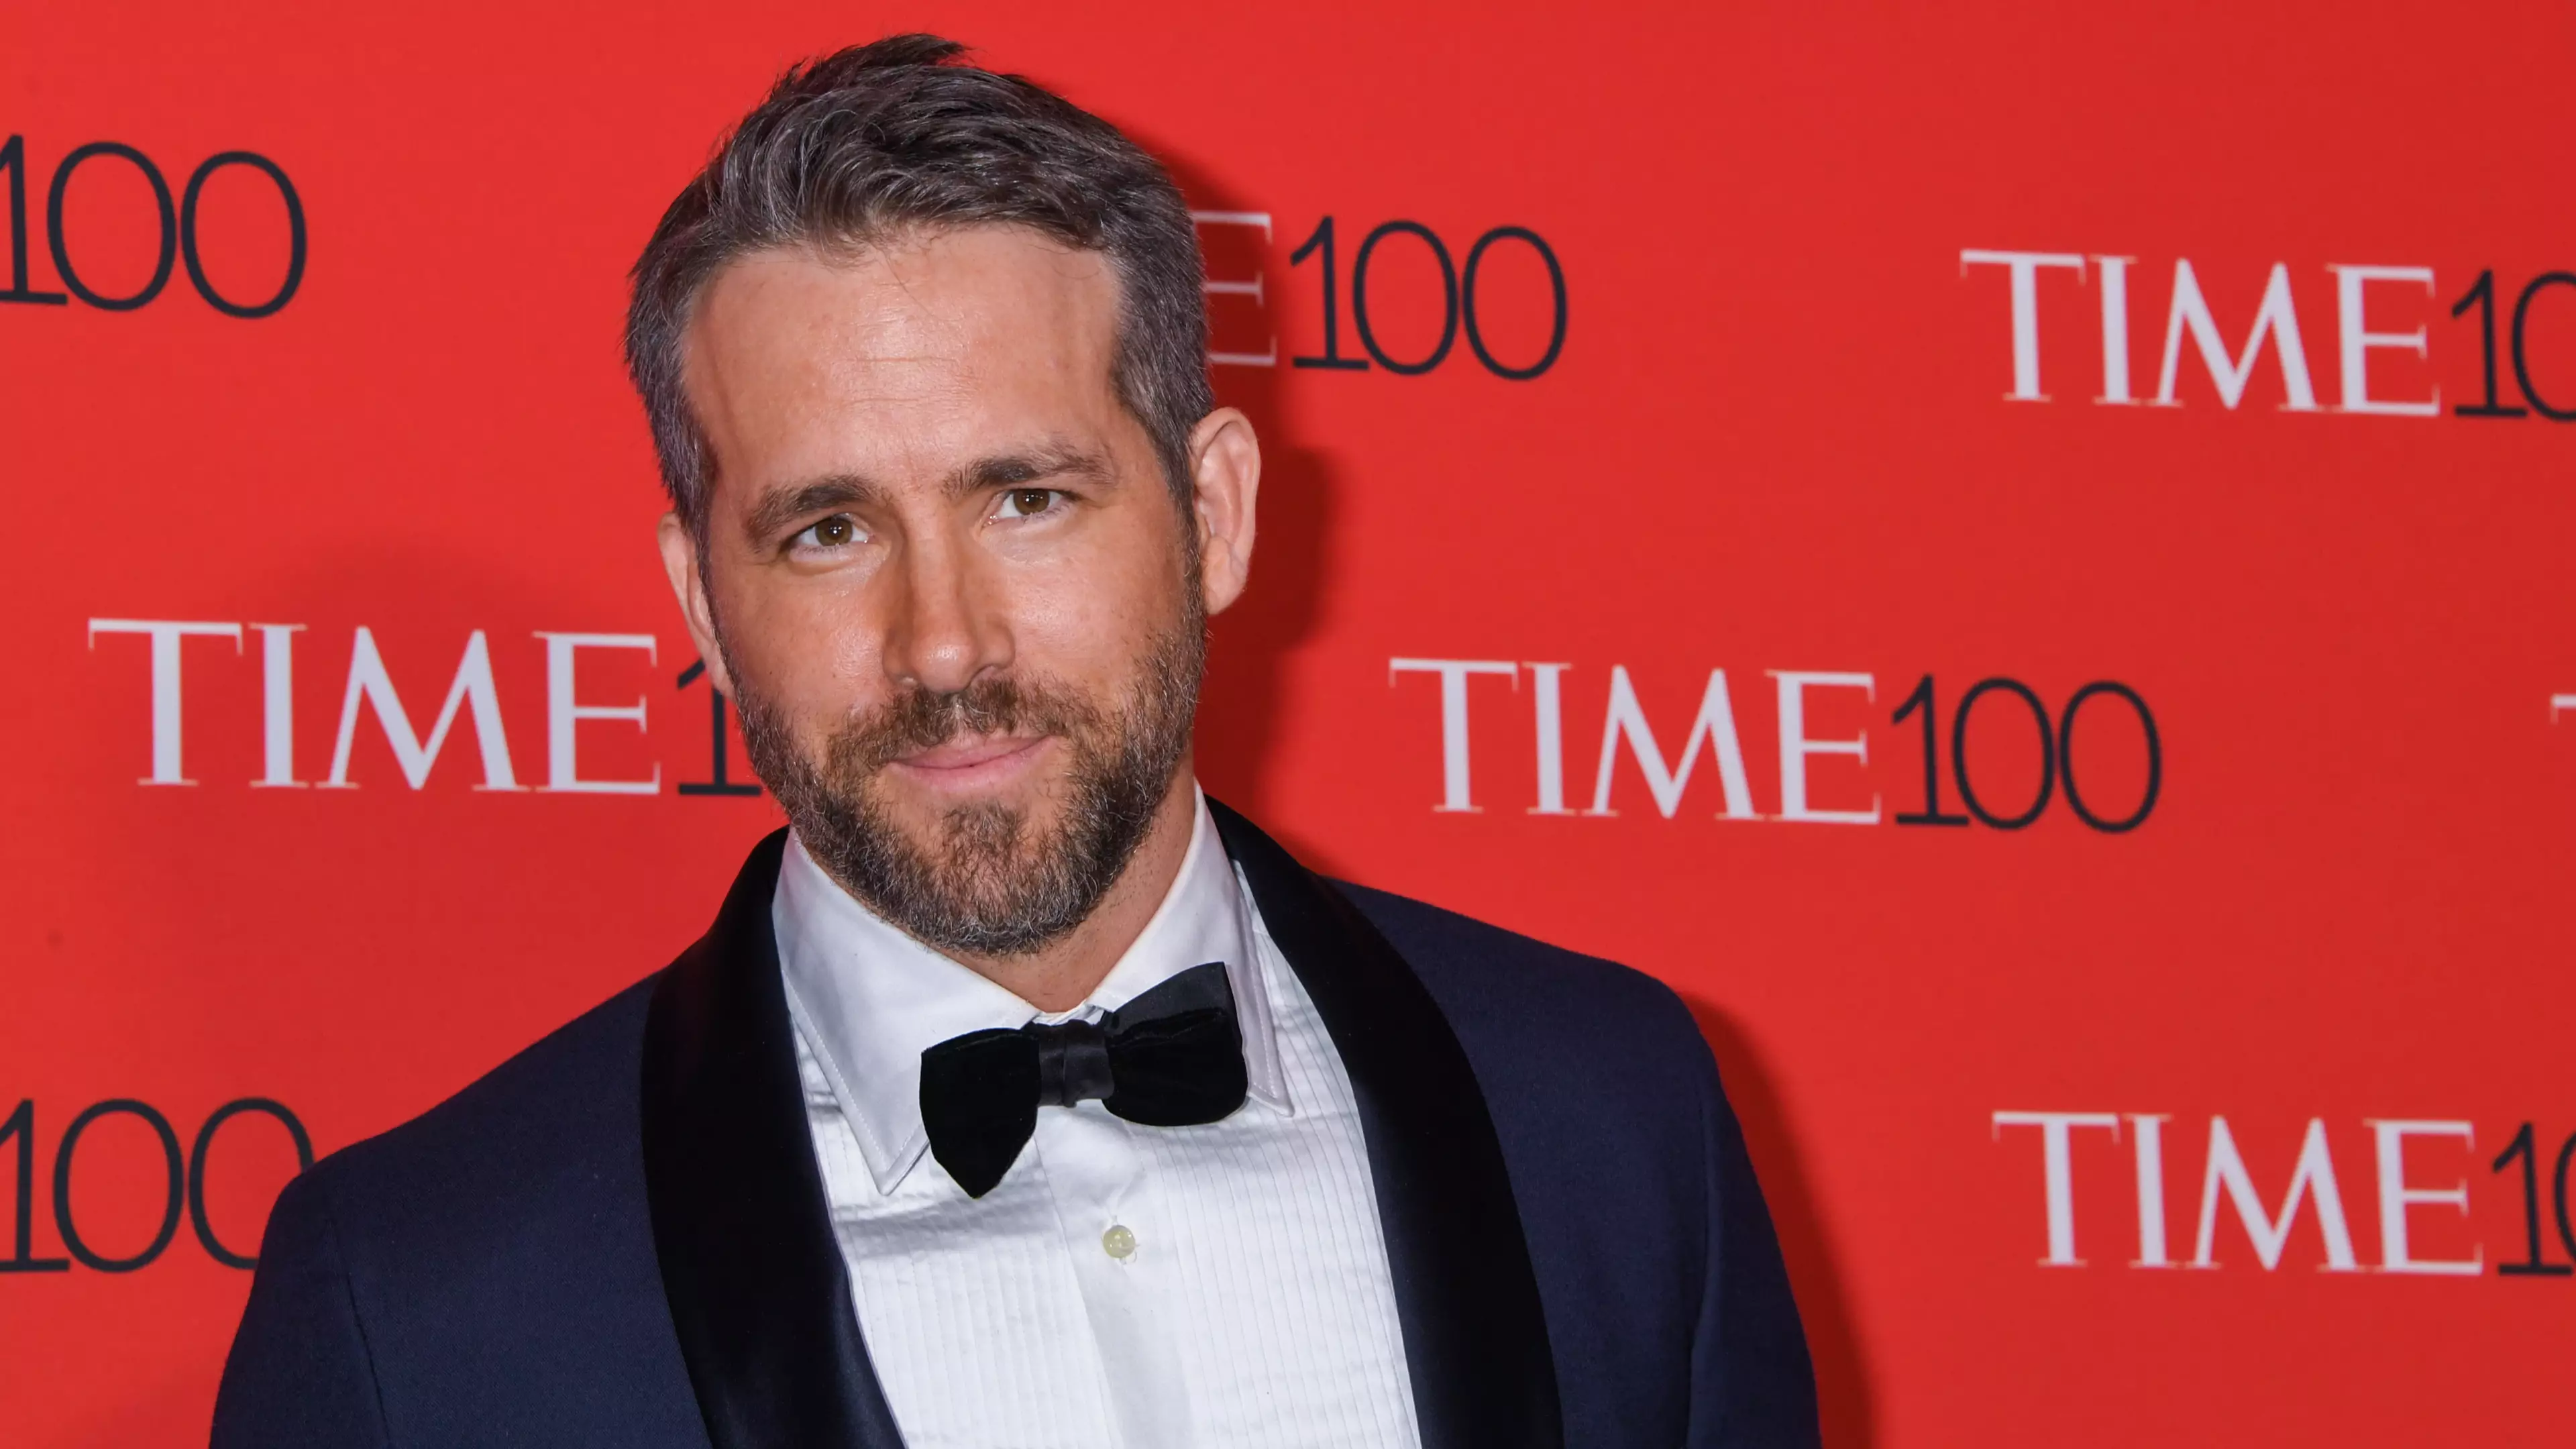 Ryan Reynolds Reveals The Funniest Prank He's Ever Pulled